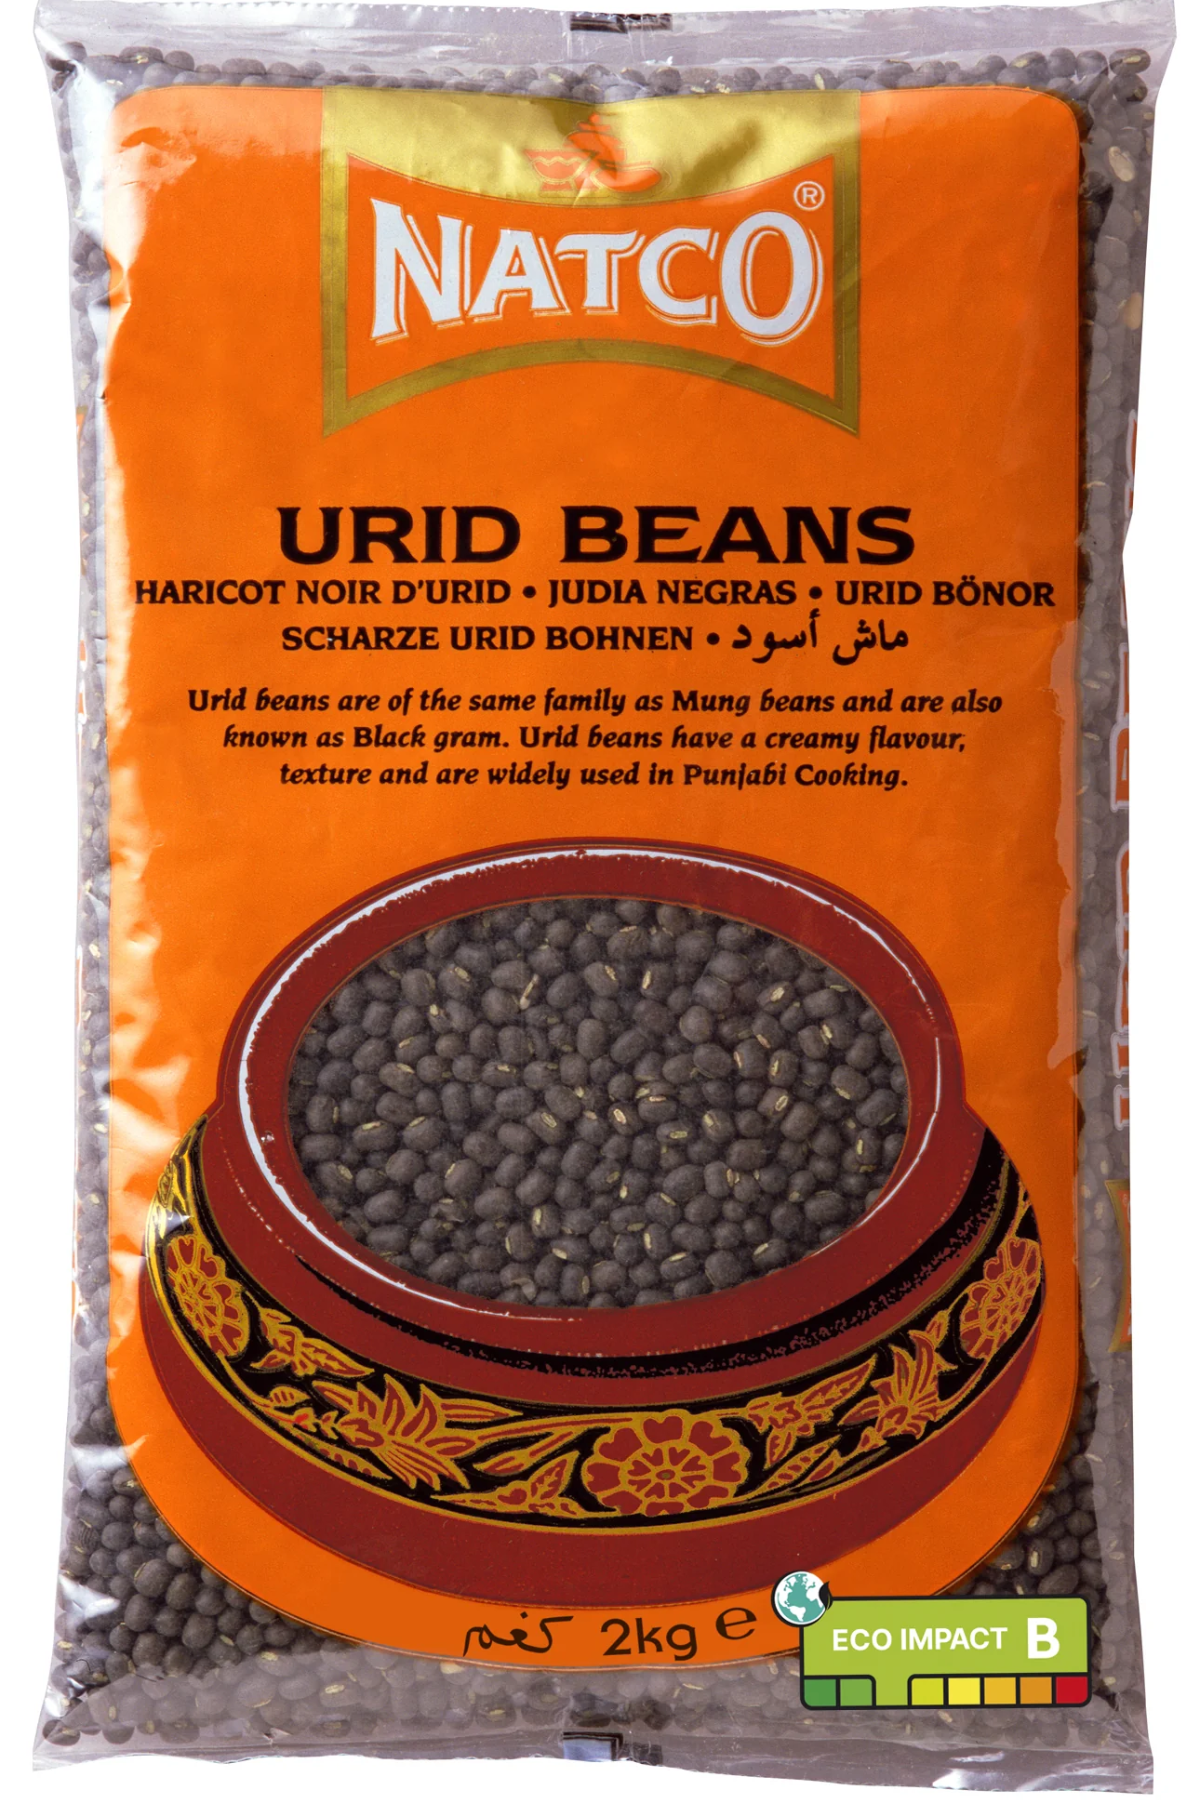 Urid beans in a plastic case.